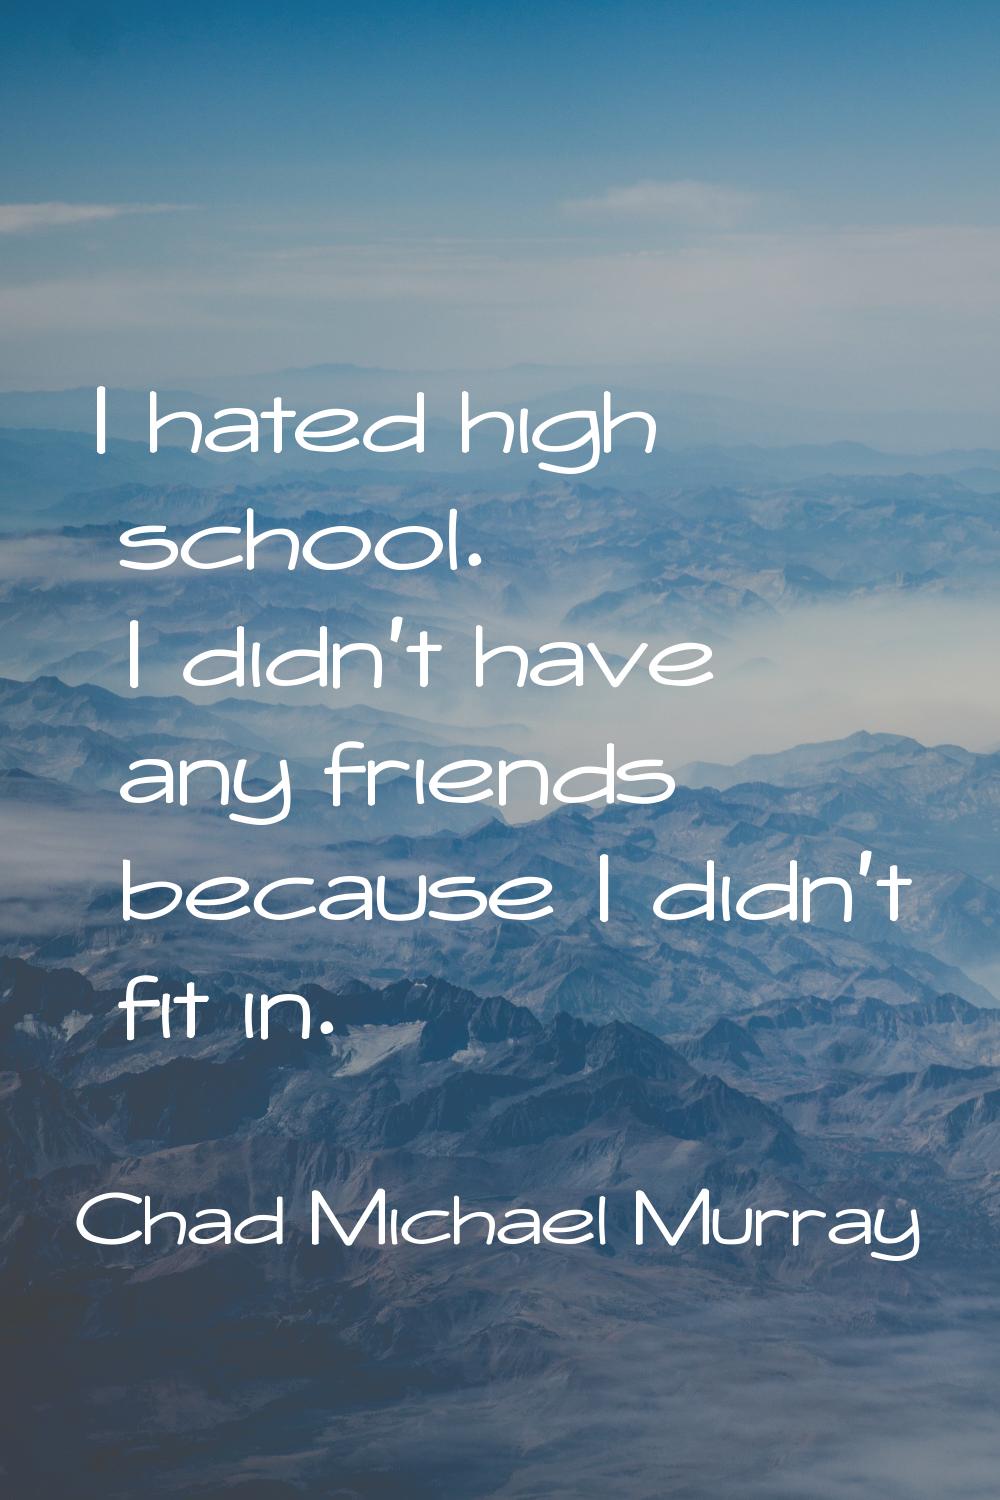 I hated high school. I didn't have any friends because I didn't fit in.